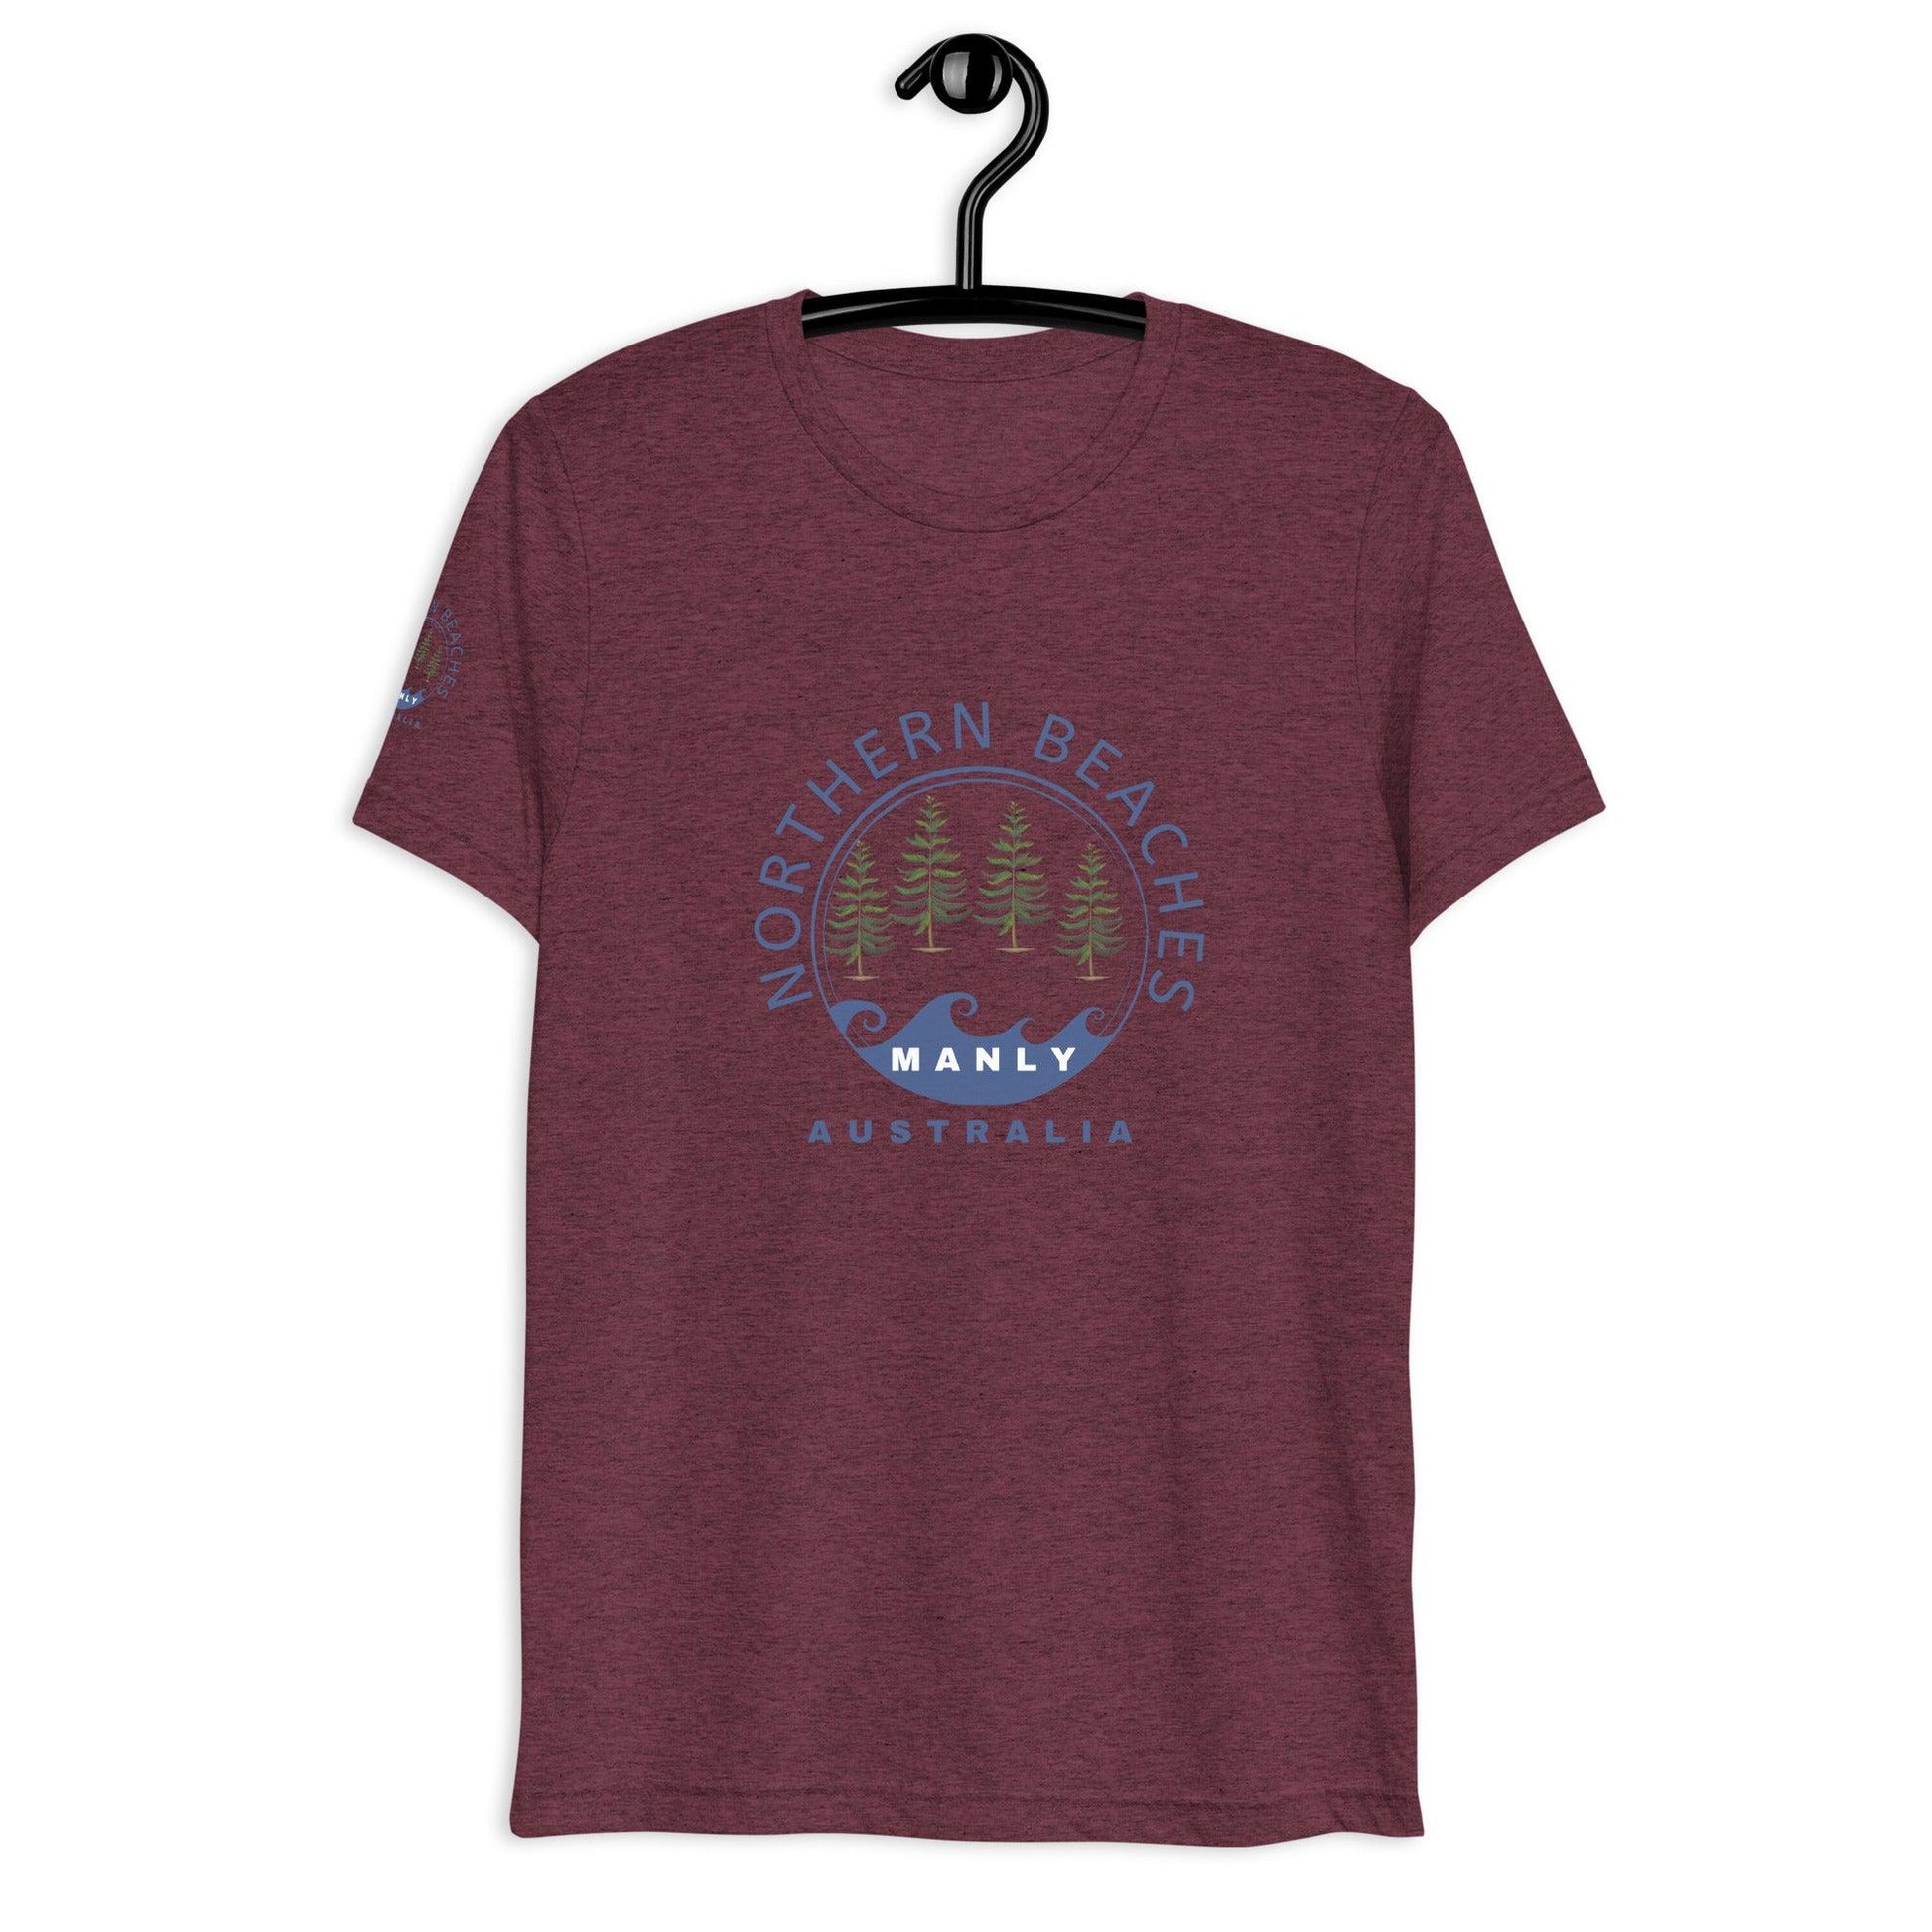 Short sleeve t-shirt with logo in 3 places - Lost Manly Shop